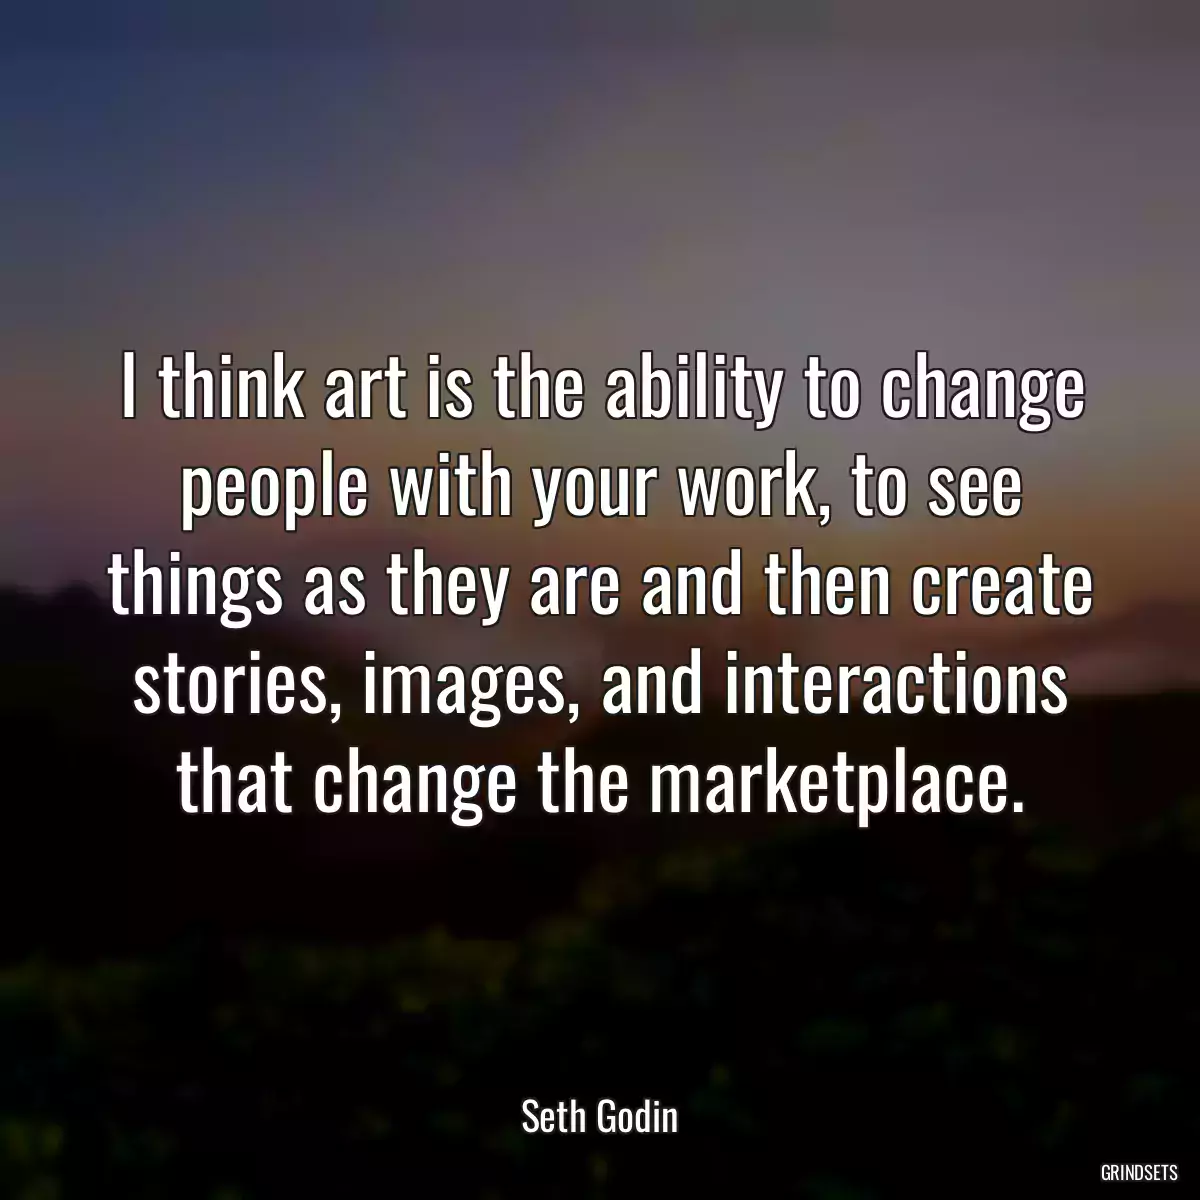 I think art is the ability to change people with your work, to see things as they are and then create stories, images, and interactions that change the marketplace.